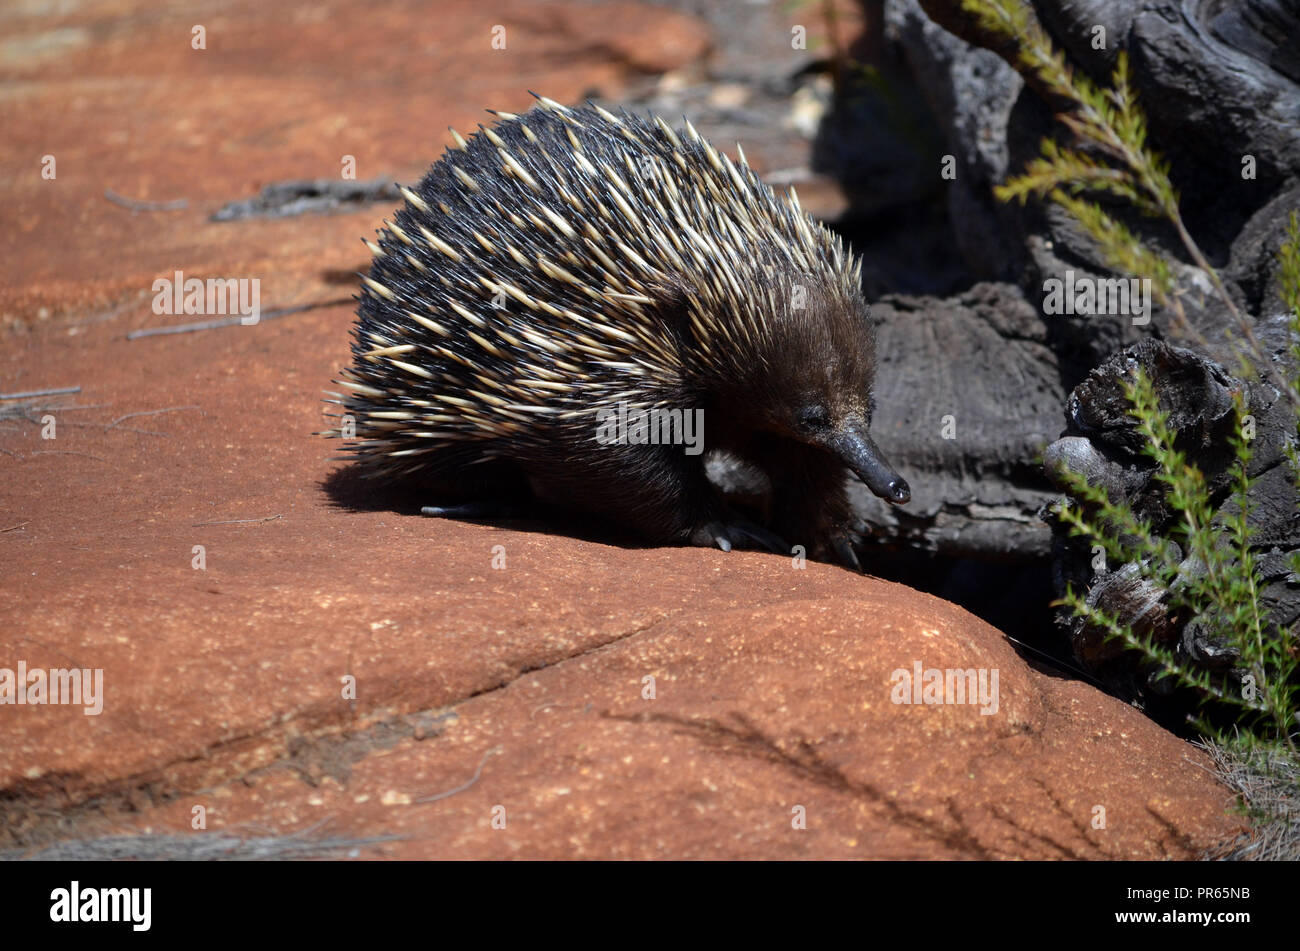 Australian echidna, the spiny anteater, Tachyglossus aculeatus, searching for ants on sandstone rocks, Royal National Park, Sydney, NSW, Australia Stock Photo